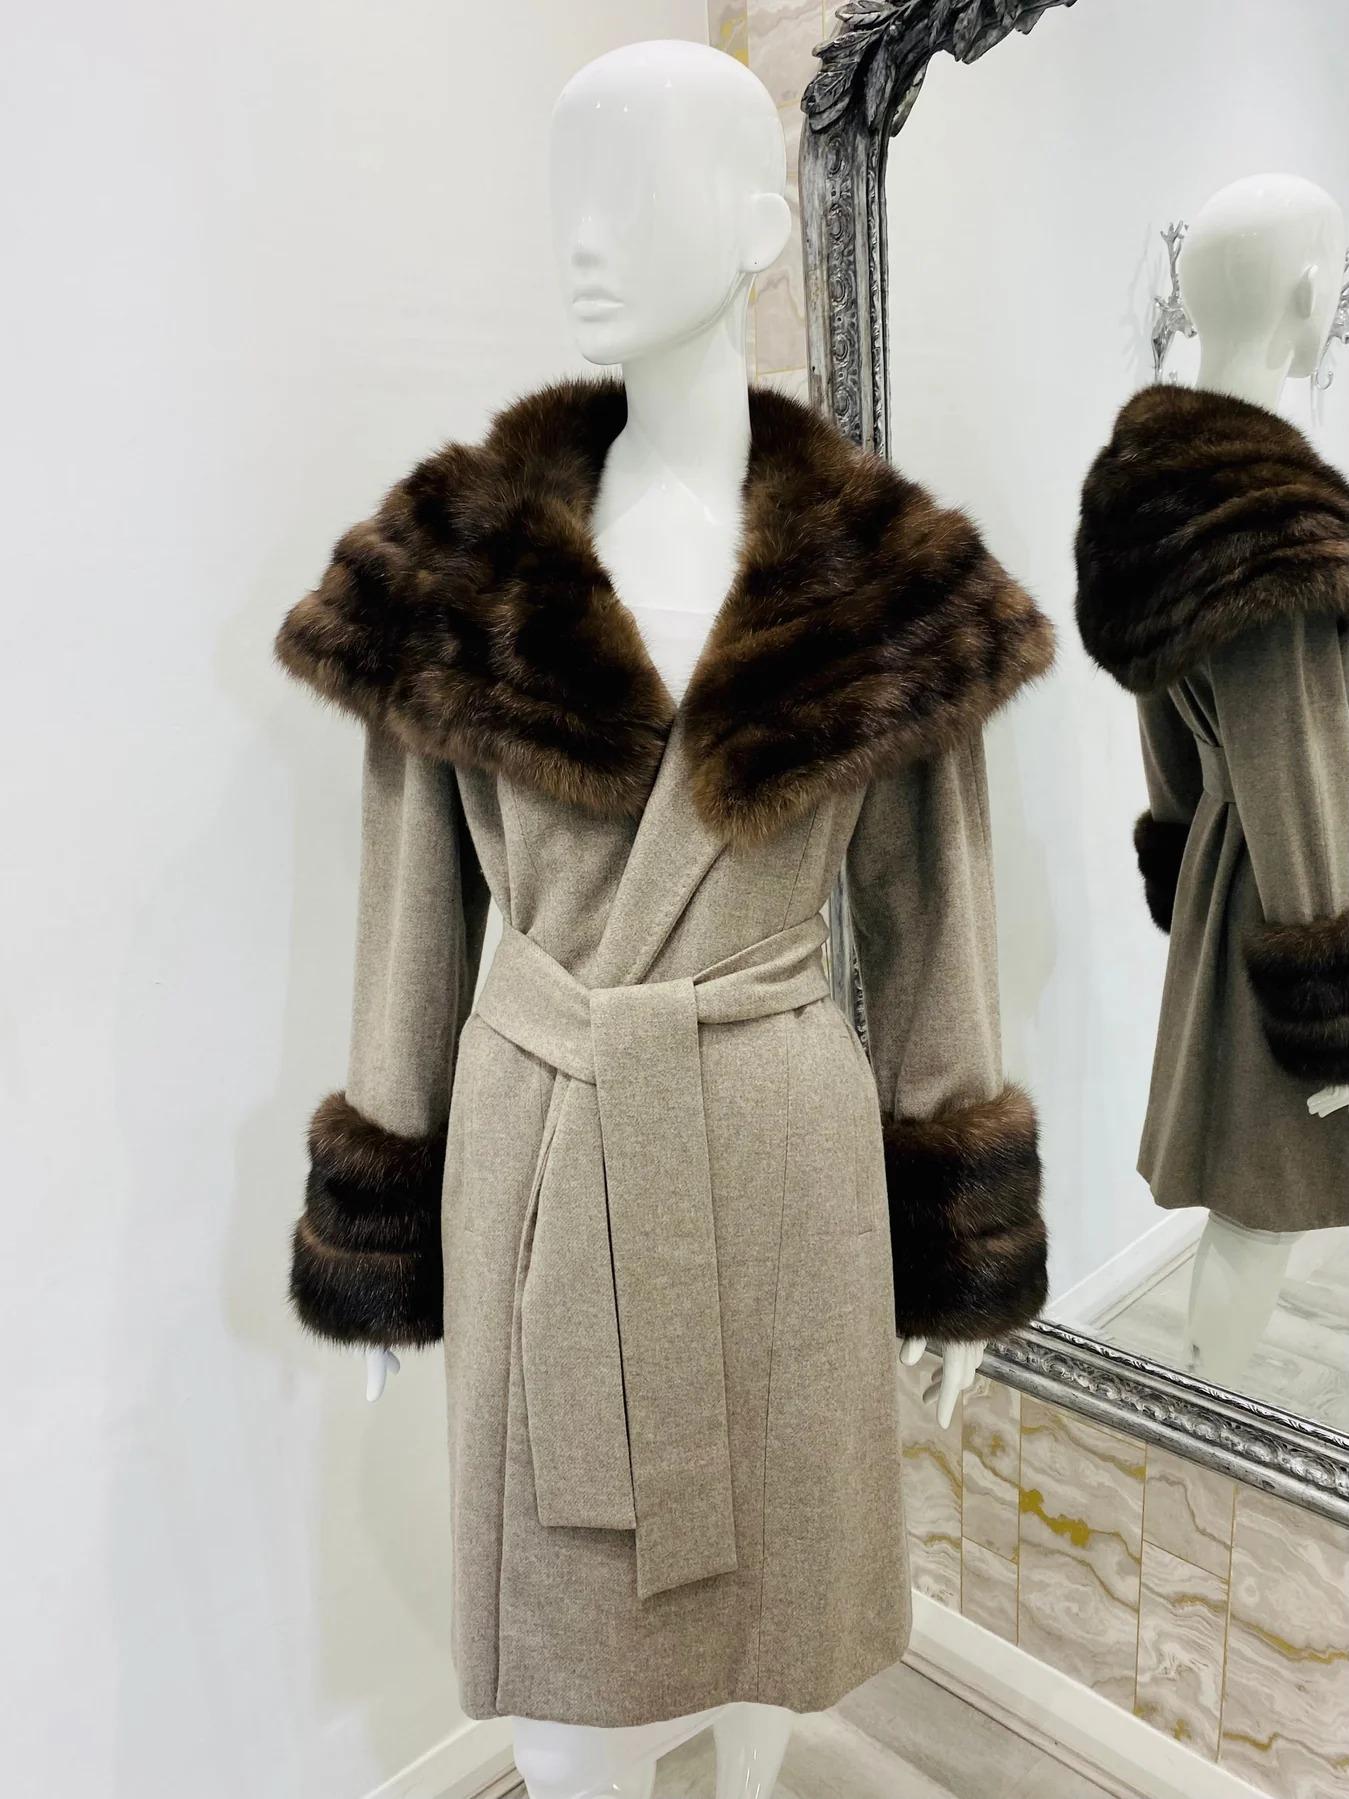 Dennis Basso Cashmere & Russian Sable Mink Fur Coat

Beige/light brown wrap coat with self tie waist. Oversized collar and cuffs in Sable Mink fur.

Additional information:
Size – M (No label but corresponds)
Composition – Cashmere, Russian Sable